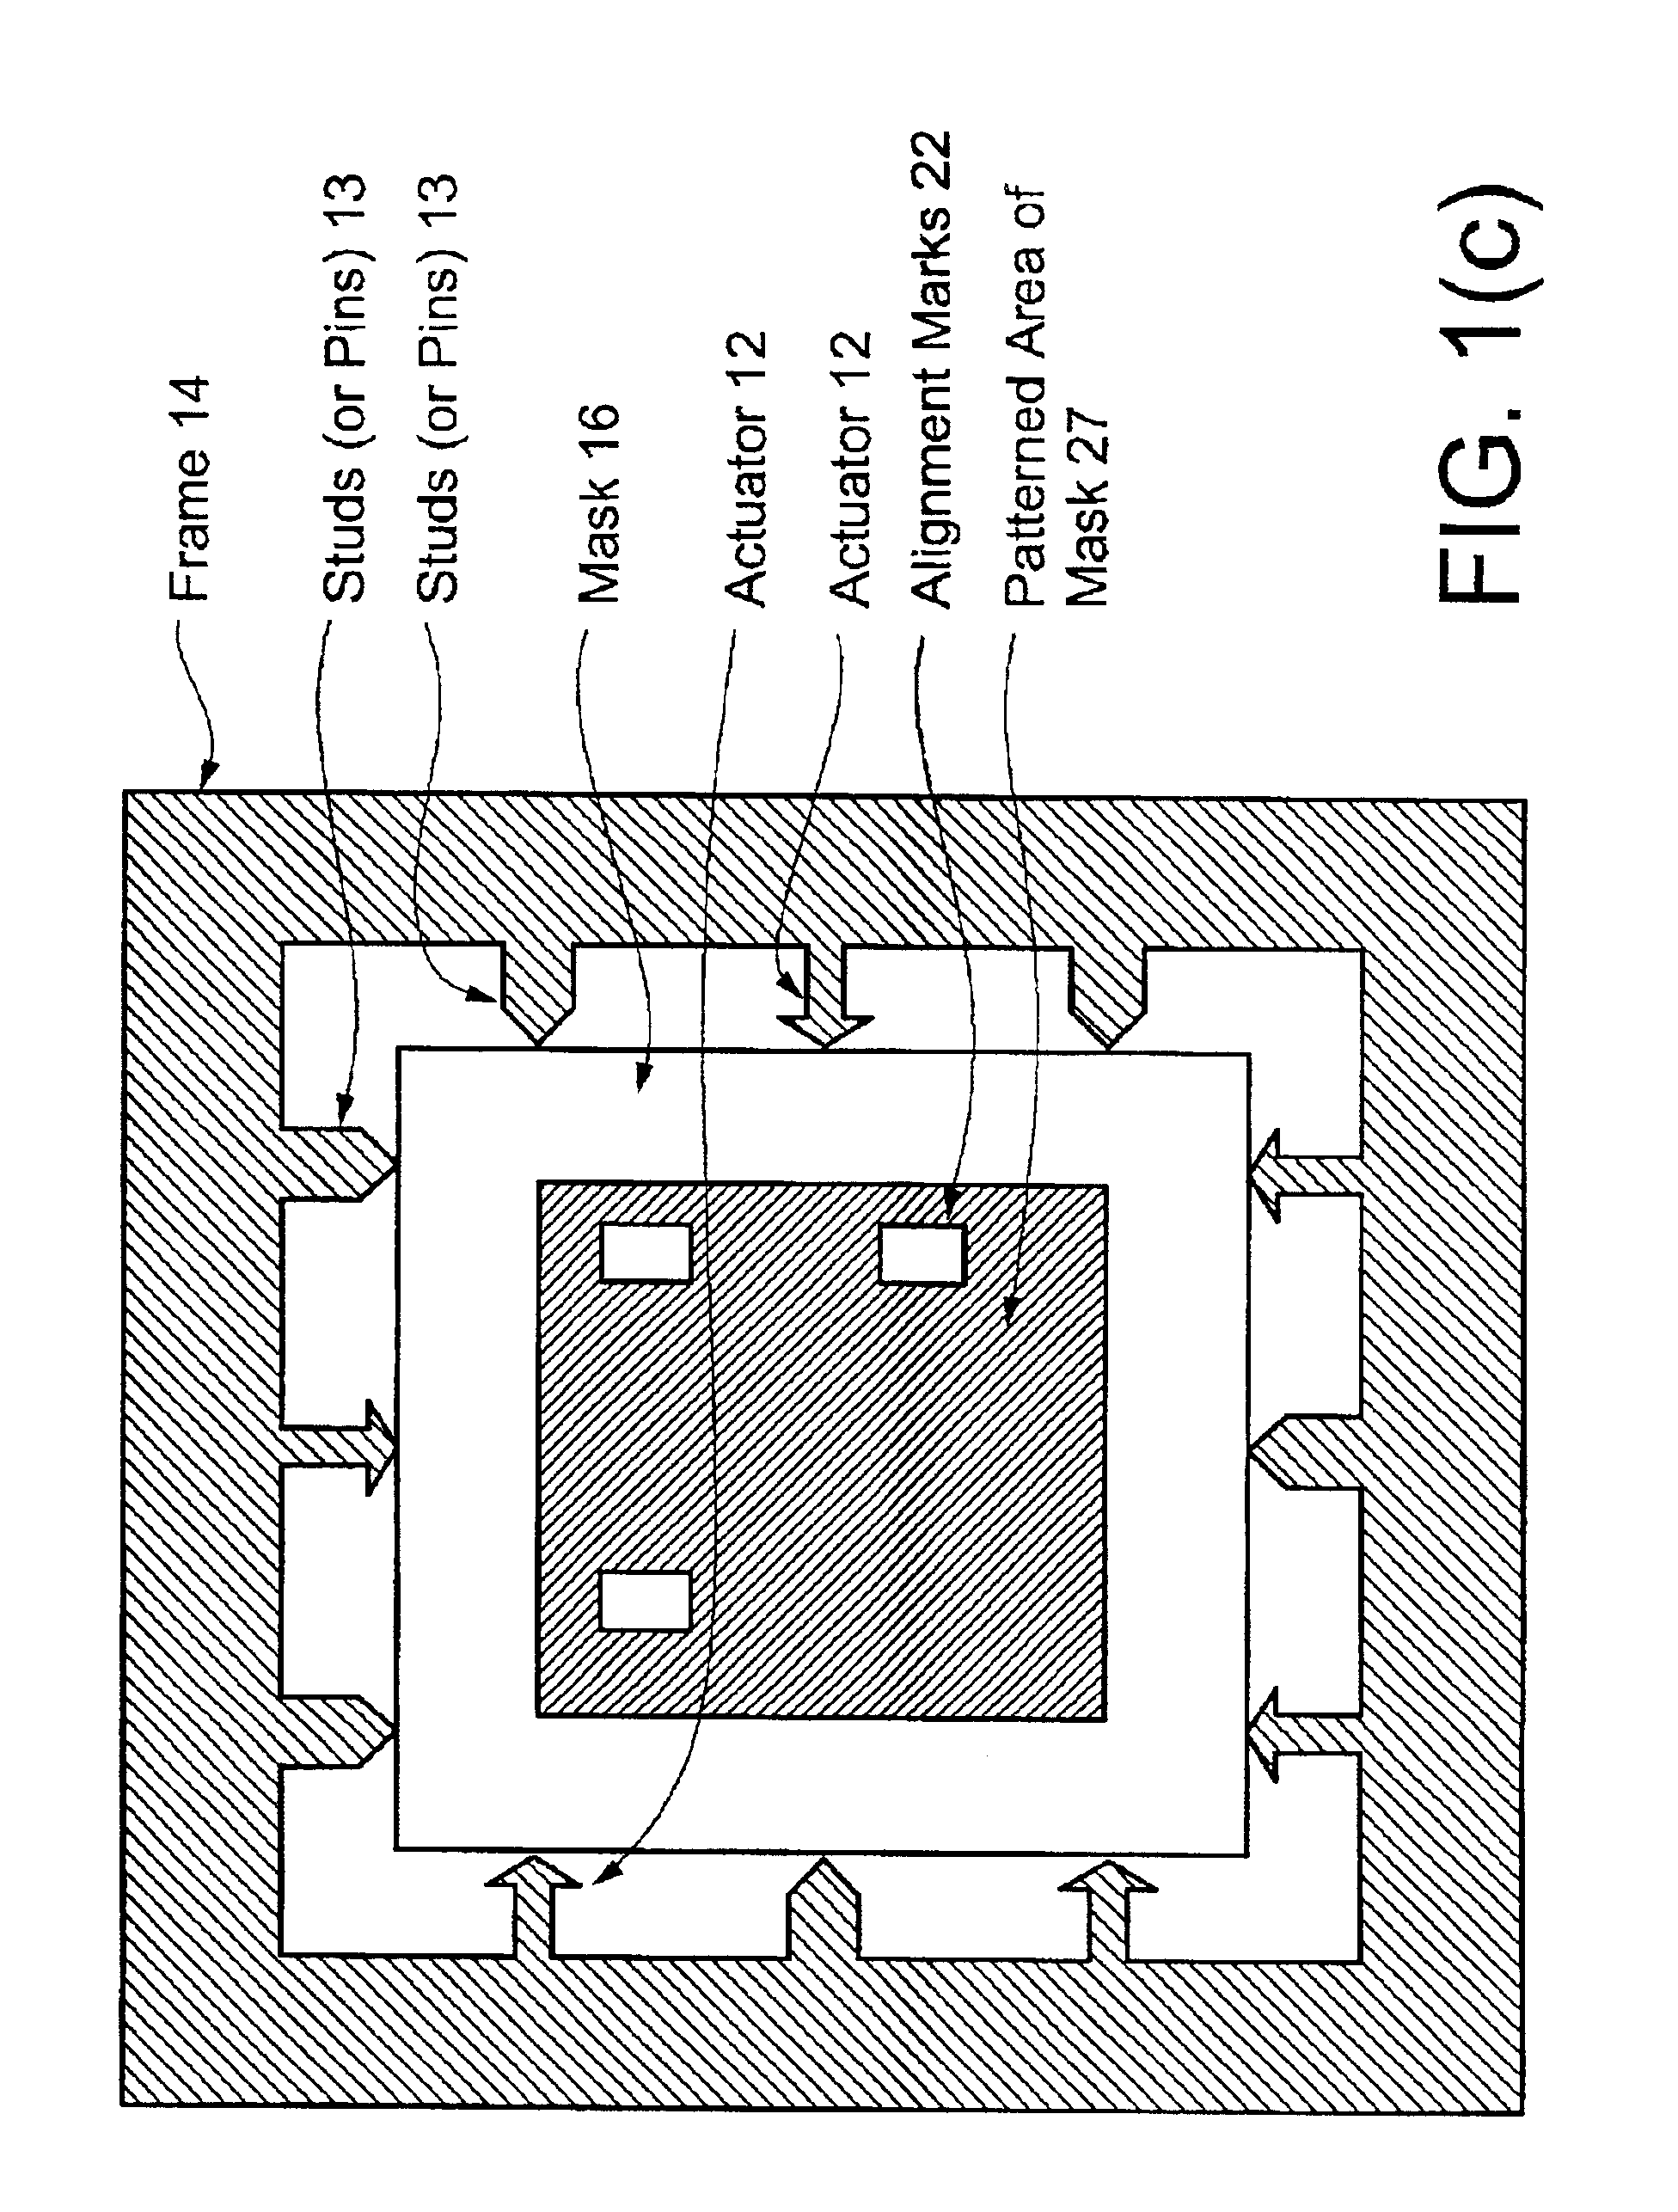 Holder, system, and process for improving overlay in lithography